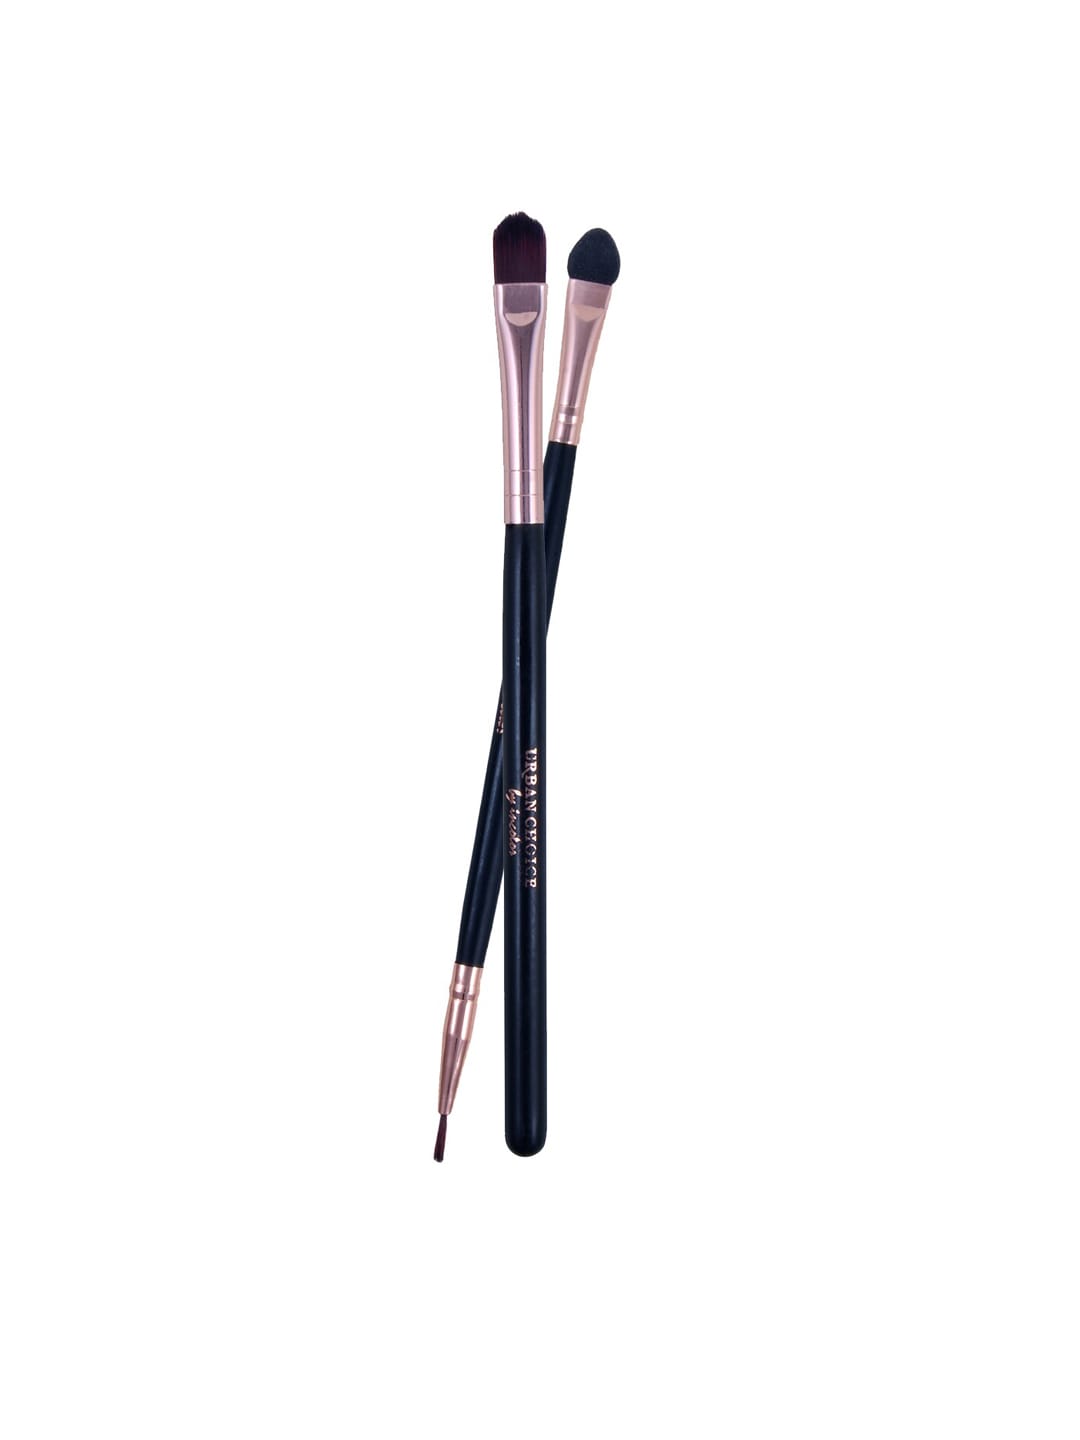 Incolor Set Of 2 Urban Choice Eyeshadow & Eyeliner Brushes Price in India